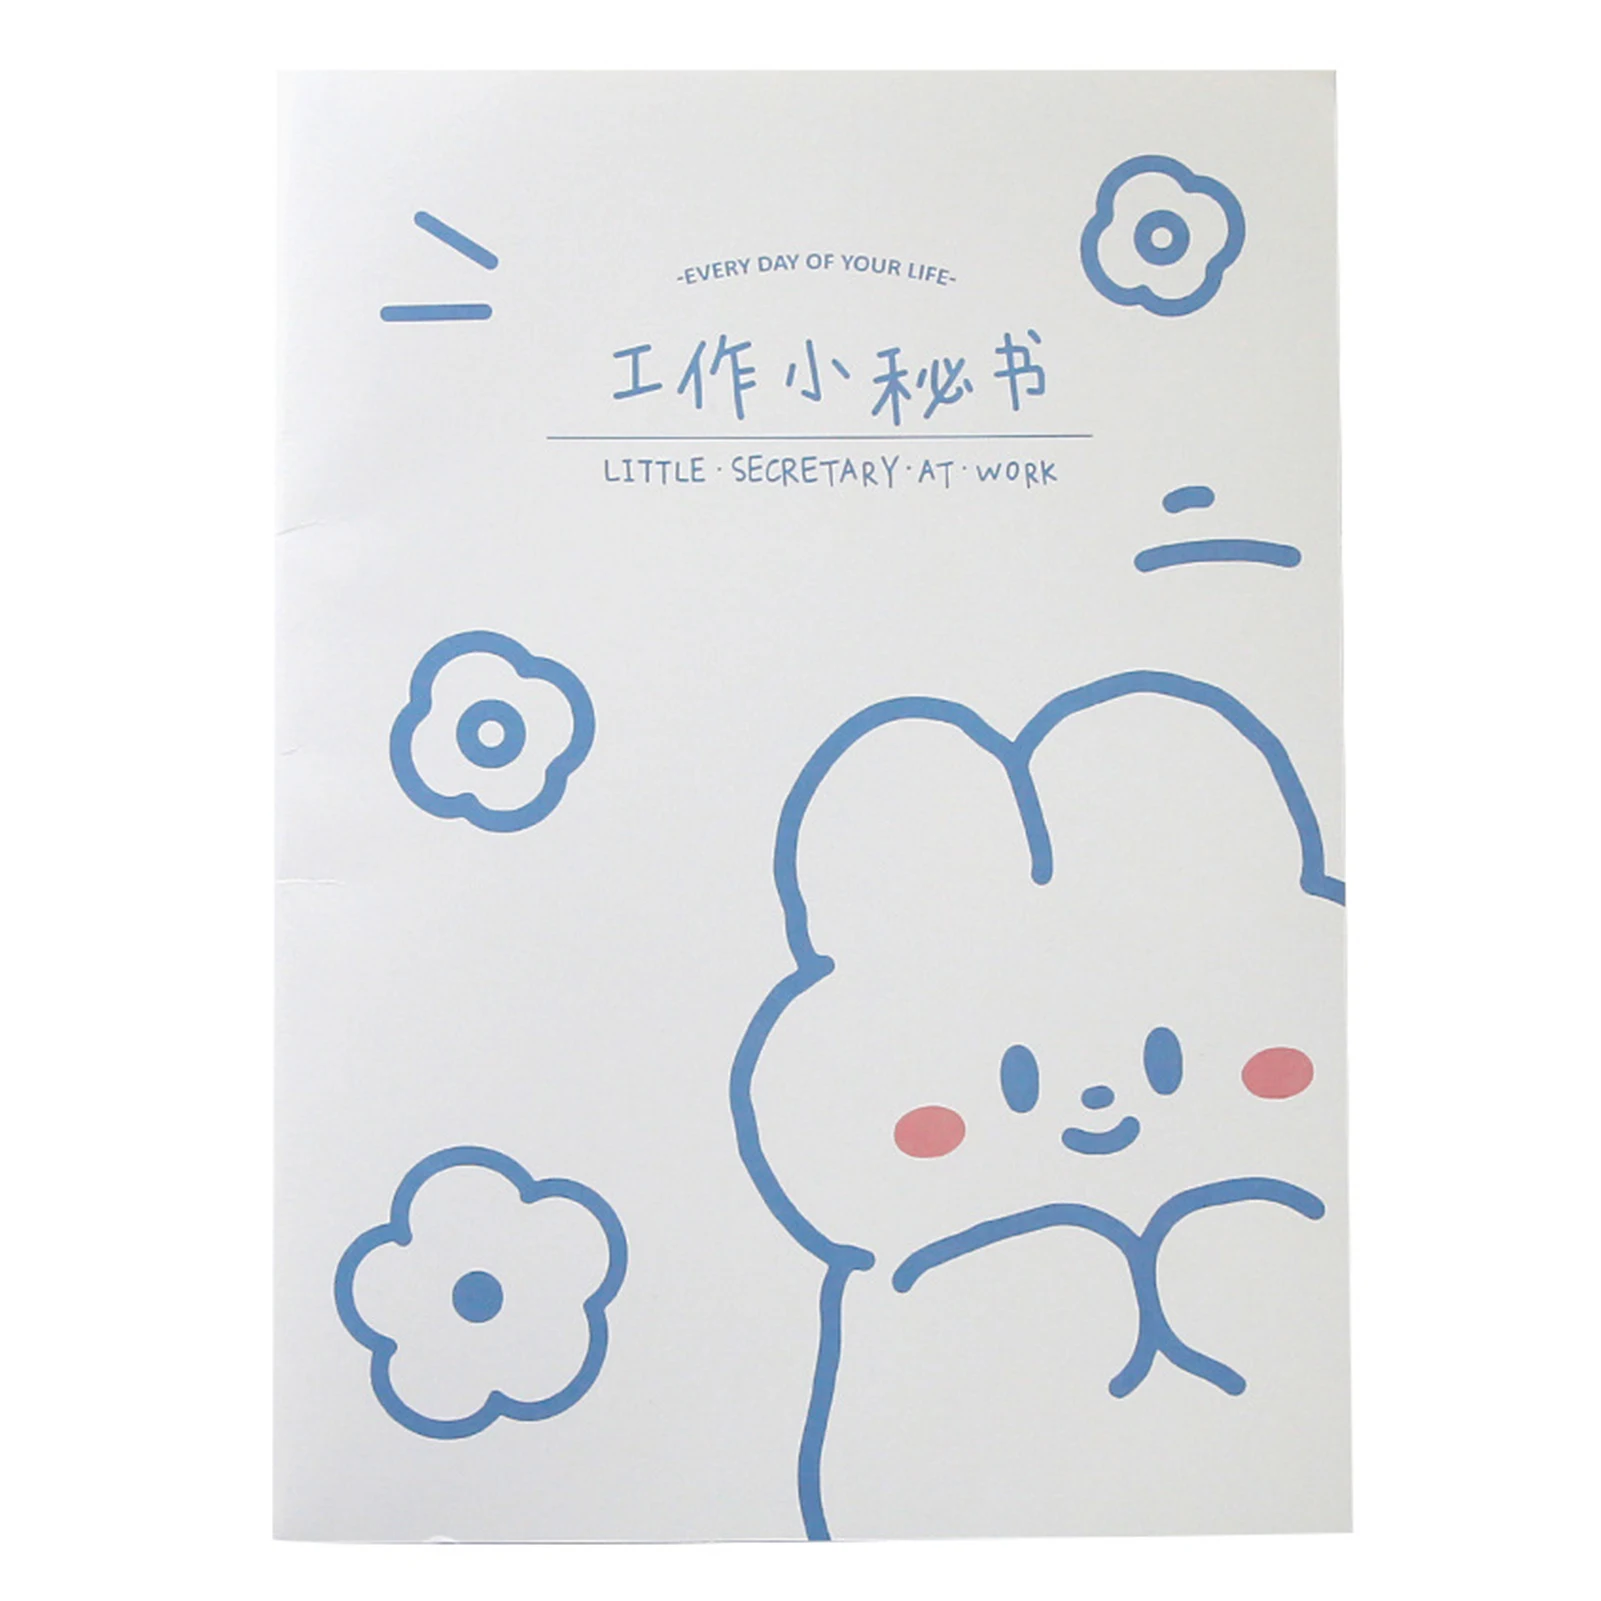 

2022 Annual Plan Notebook Daily Weekly Monthly Plan Schedule Agenda Planner Working Memo Pad Office Supplies School Charmingly